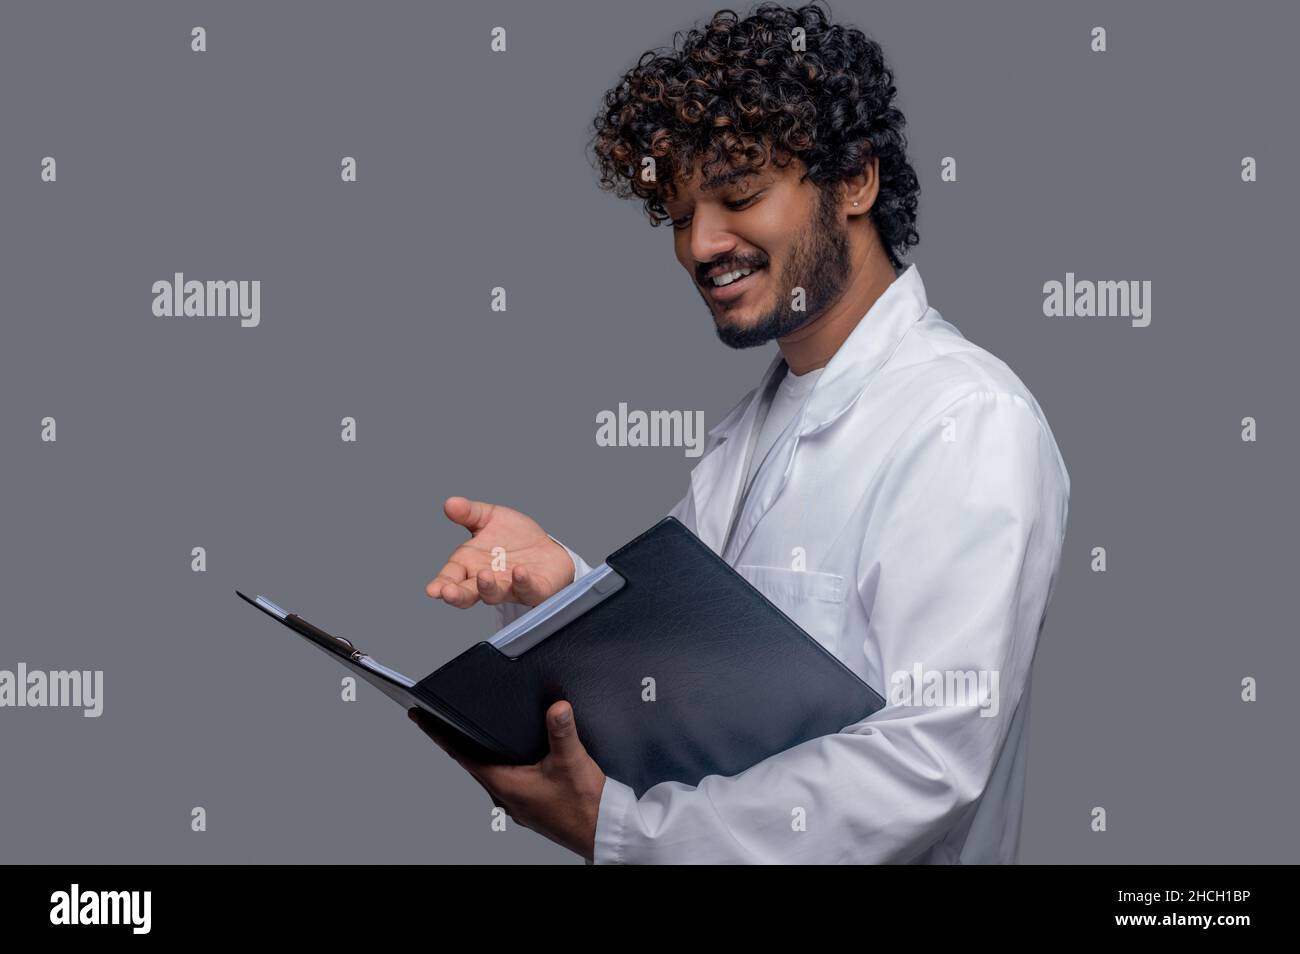 Smiling doctor scrutinizing documents in his hands Stock Photo